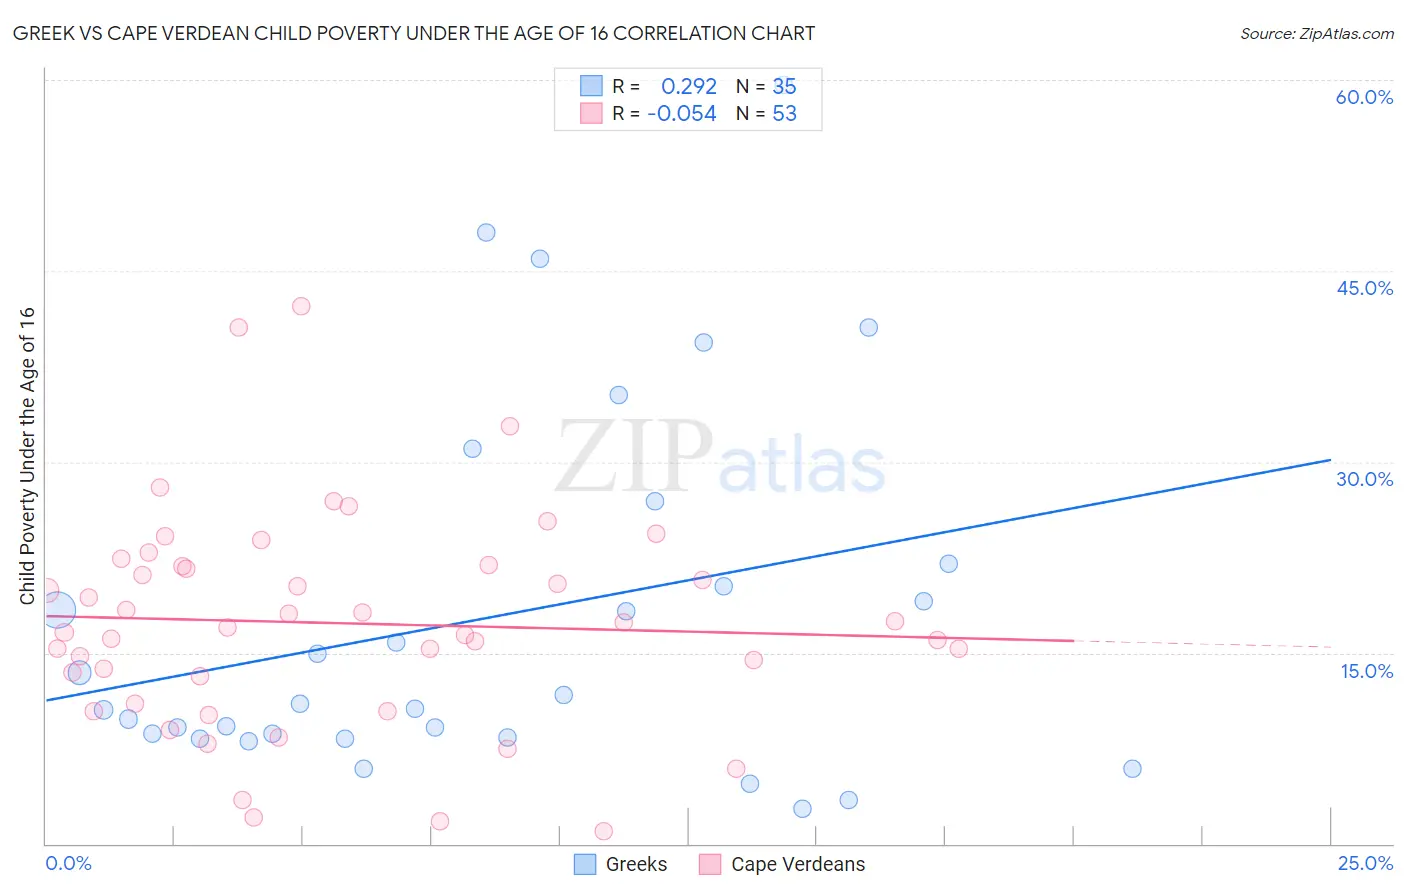 Greek vs Cape Verdean Child Poverty Under the Age of 16